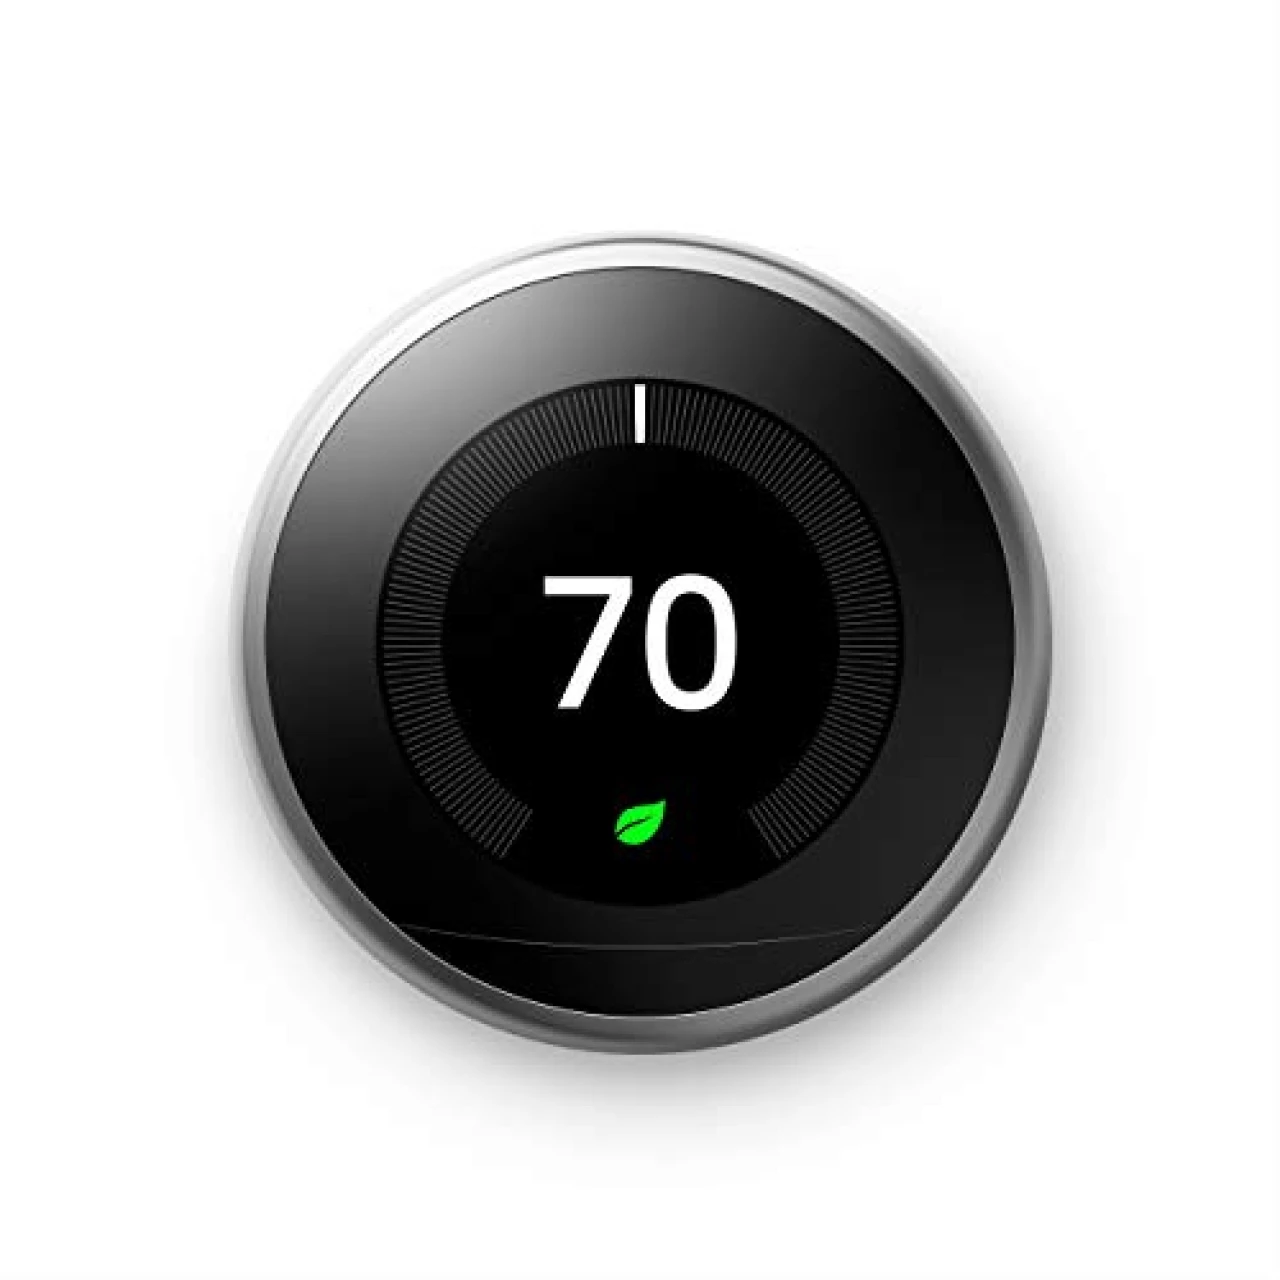 Google Nest Learning Thermostat - Programmable Smart Thermostat for Home - 3rd Generation Nest Thermostat